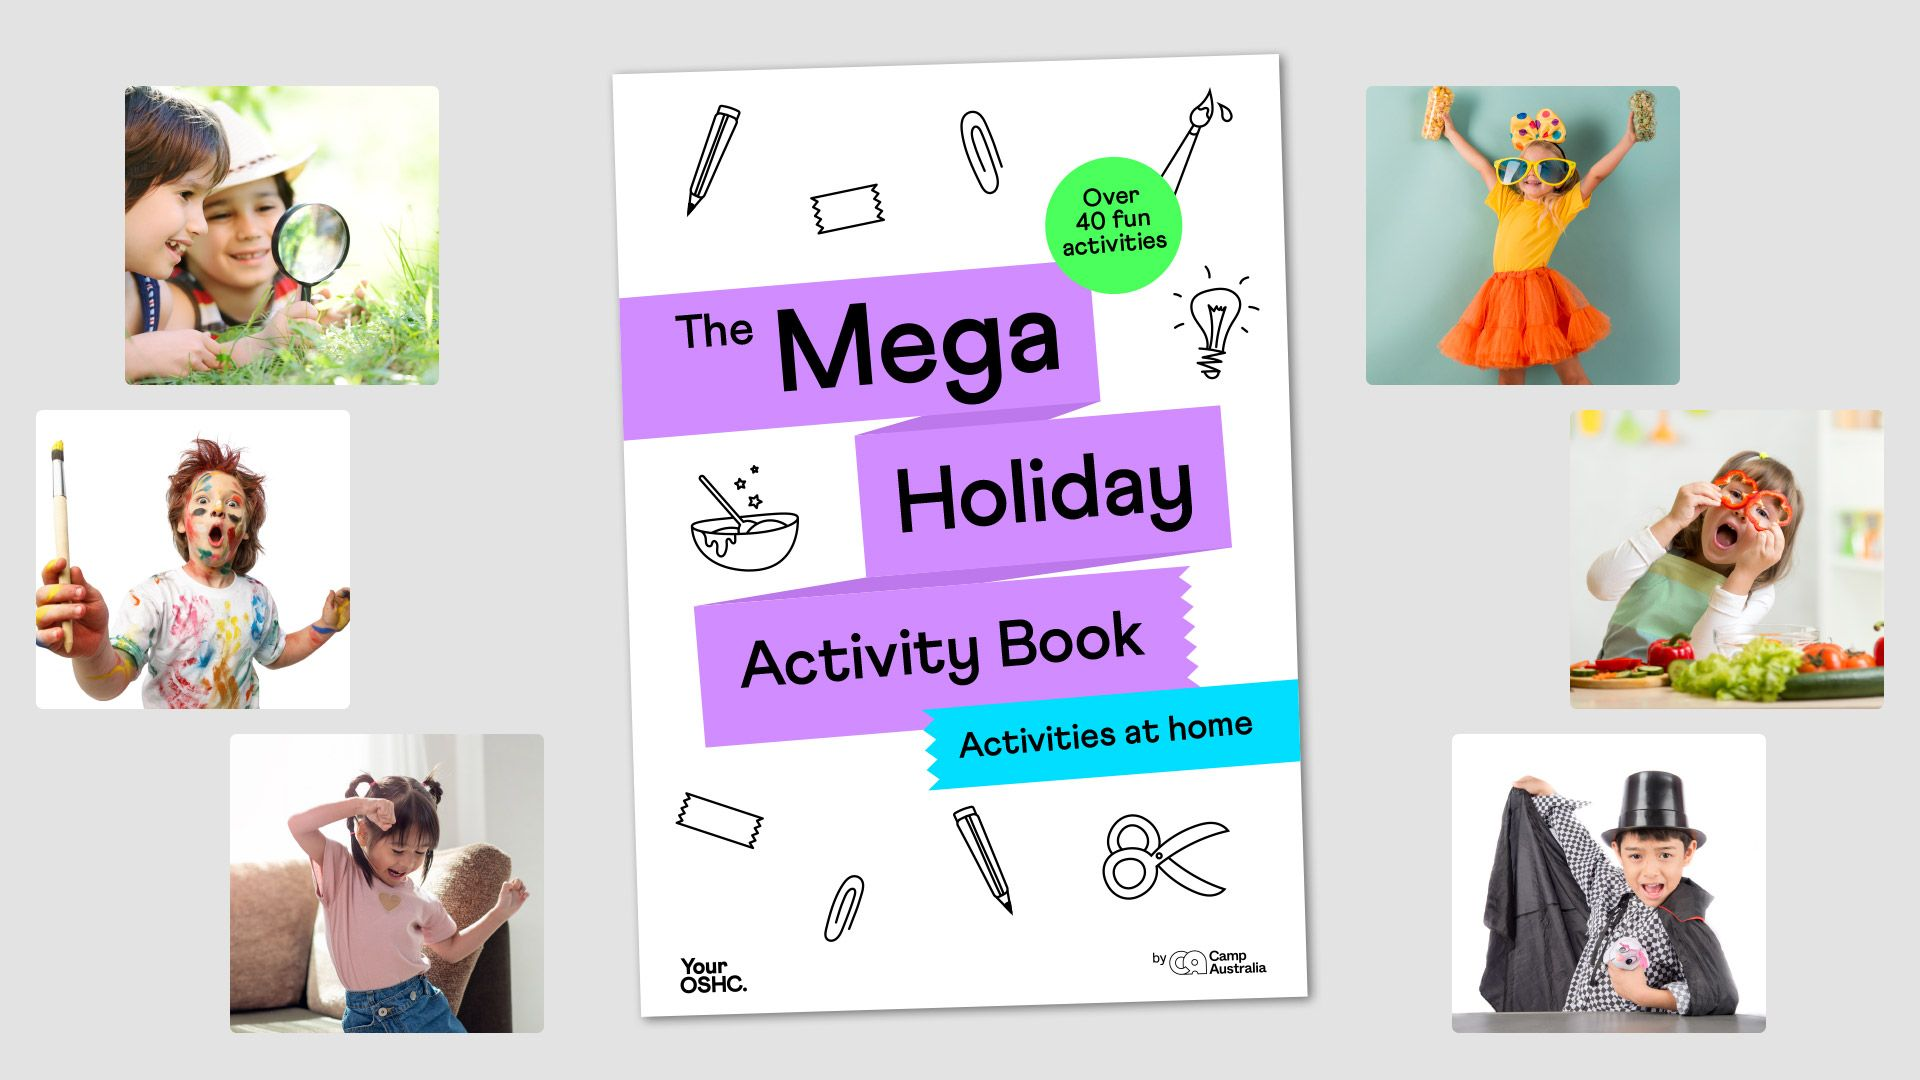 Over 40 Activities to Keep Kids Entertained on the School Holidays